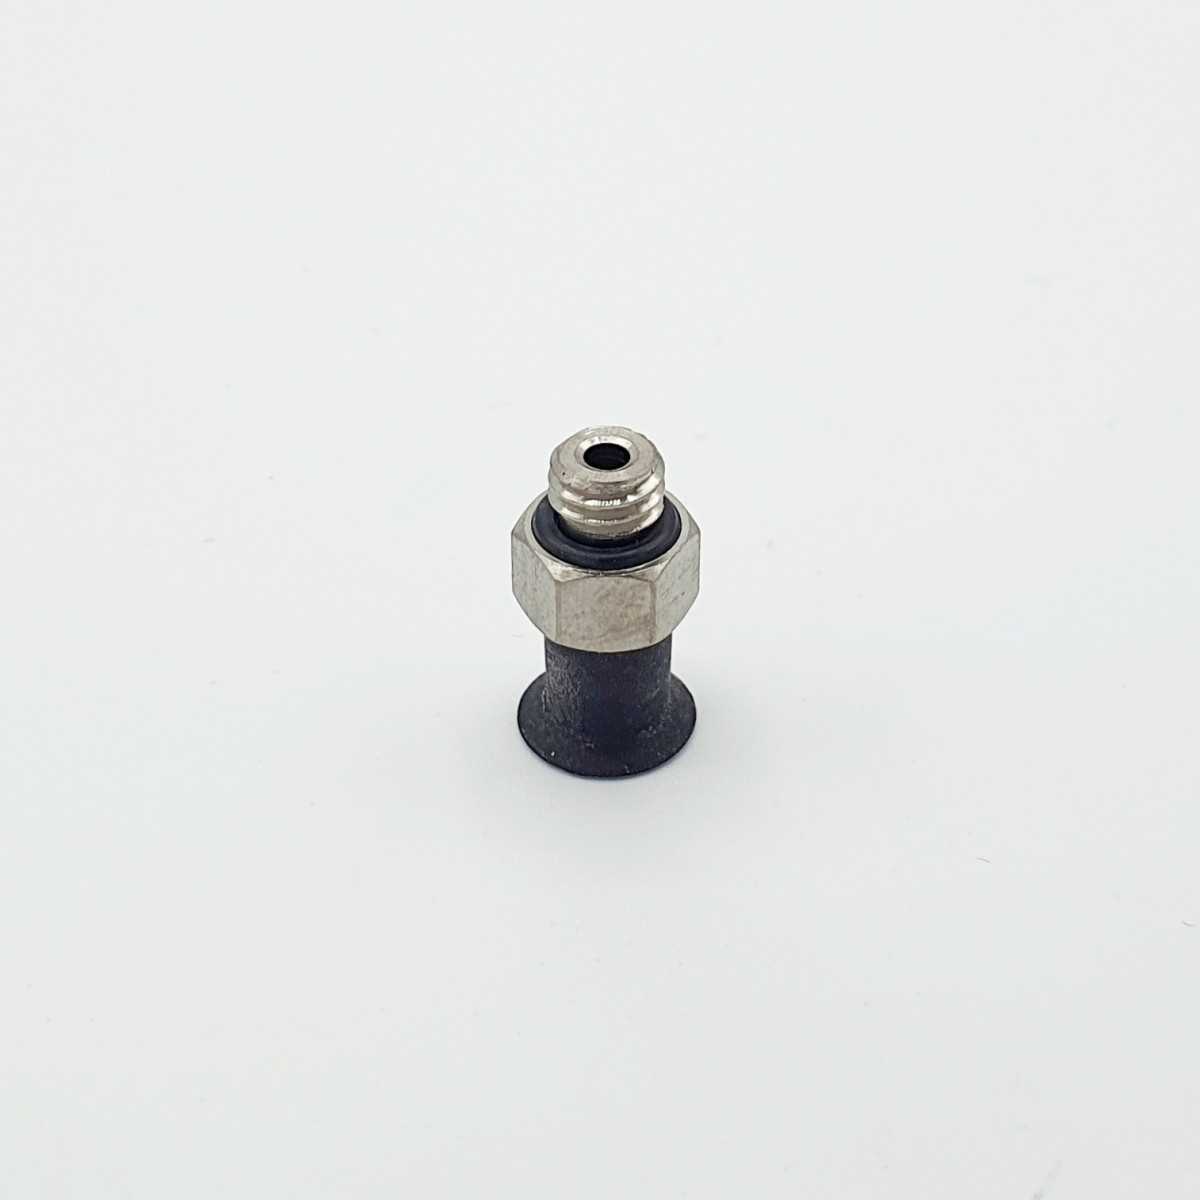 Flat suction cup D4 / SIL / o.S. / AG M5 | Beta Online Shop